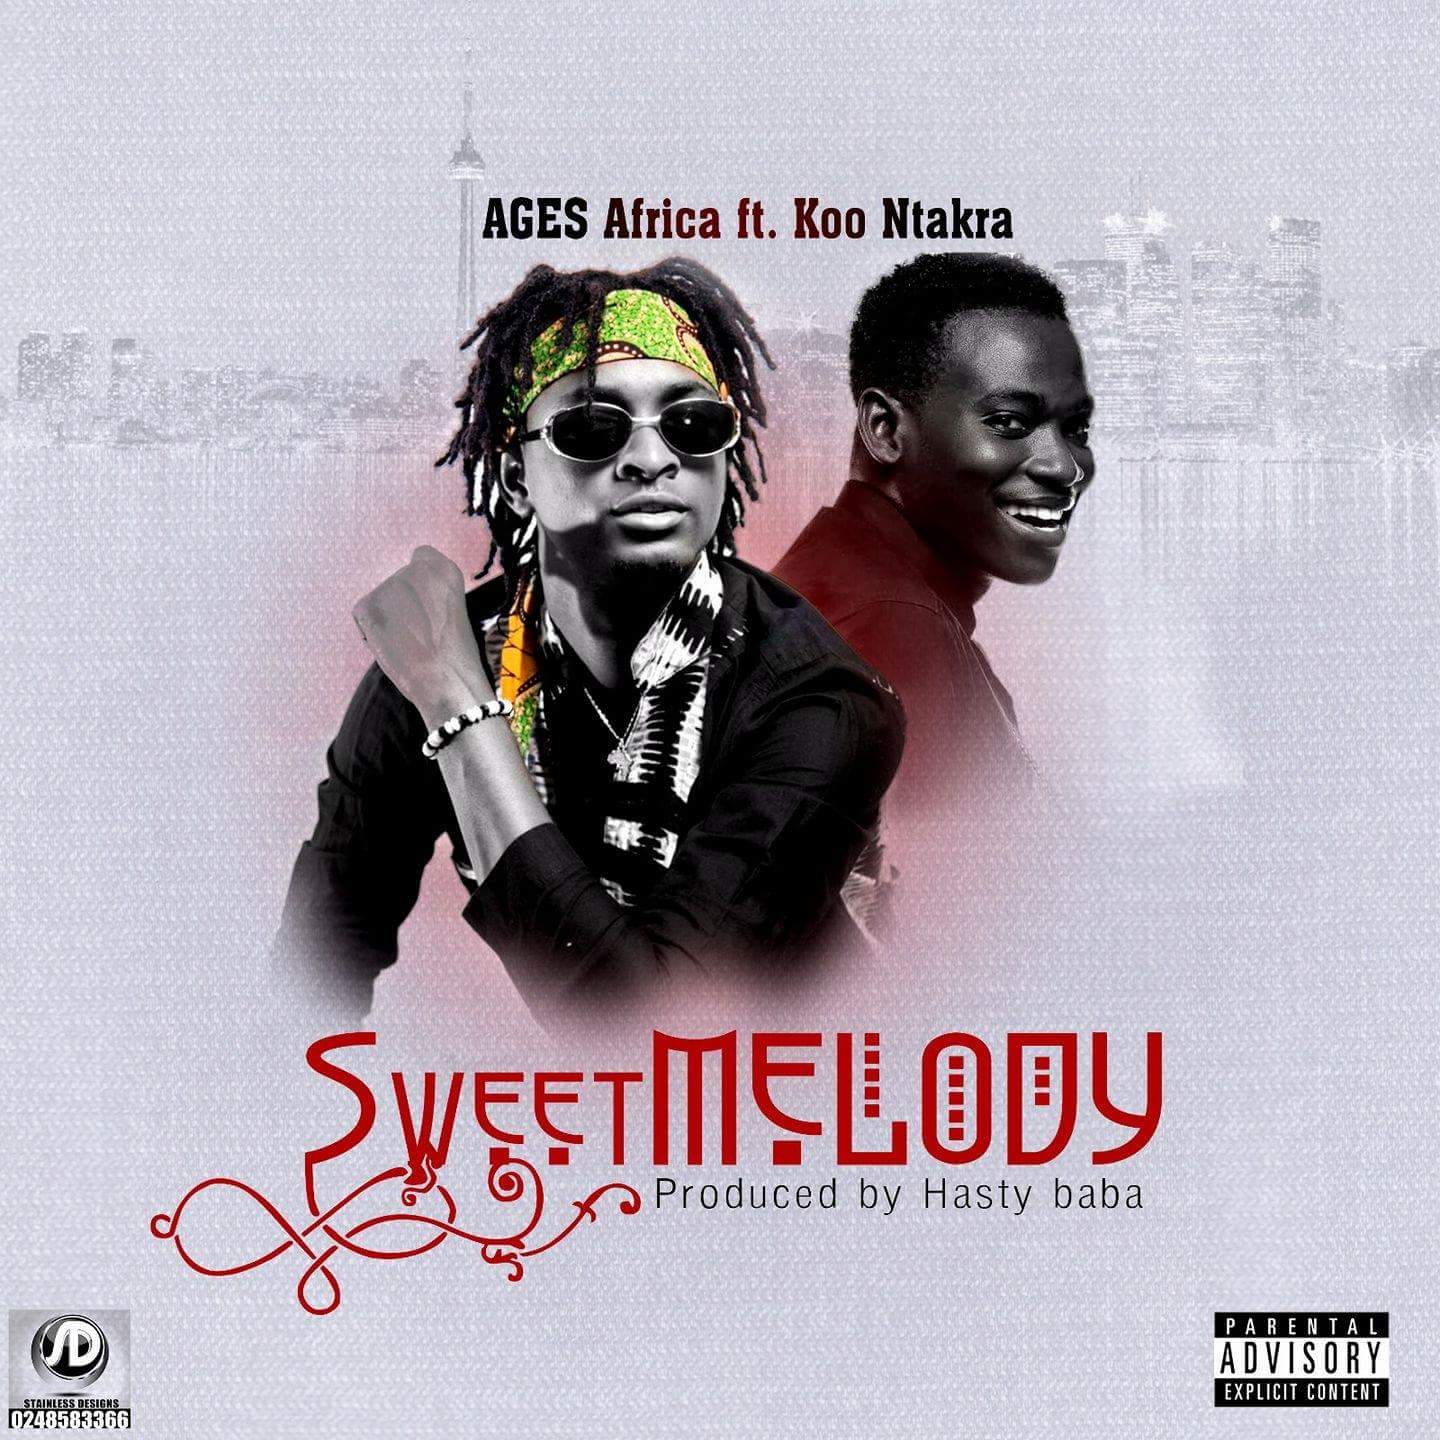 Ages Africa ft Koo Ntakra – Sweet melody (Prod by Hasty)